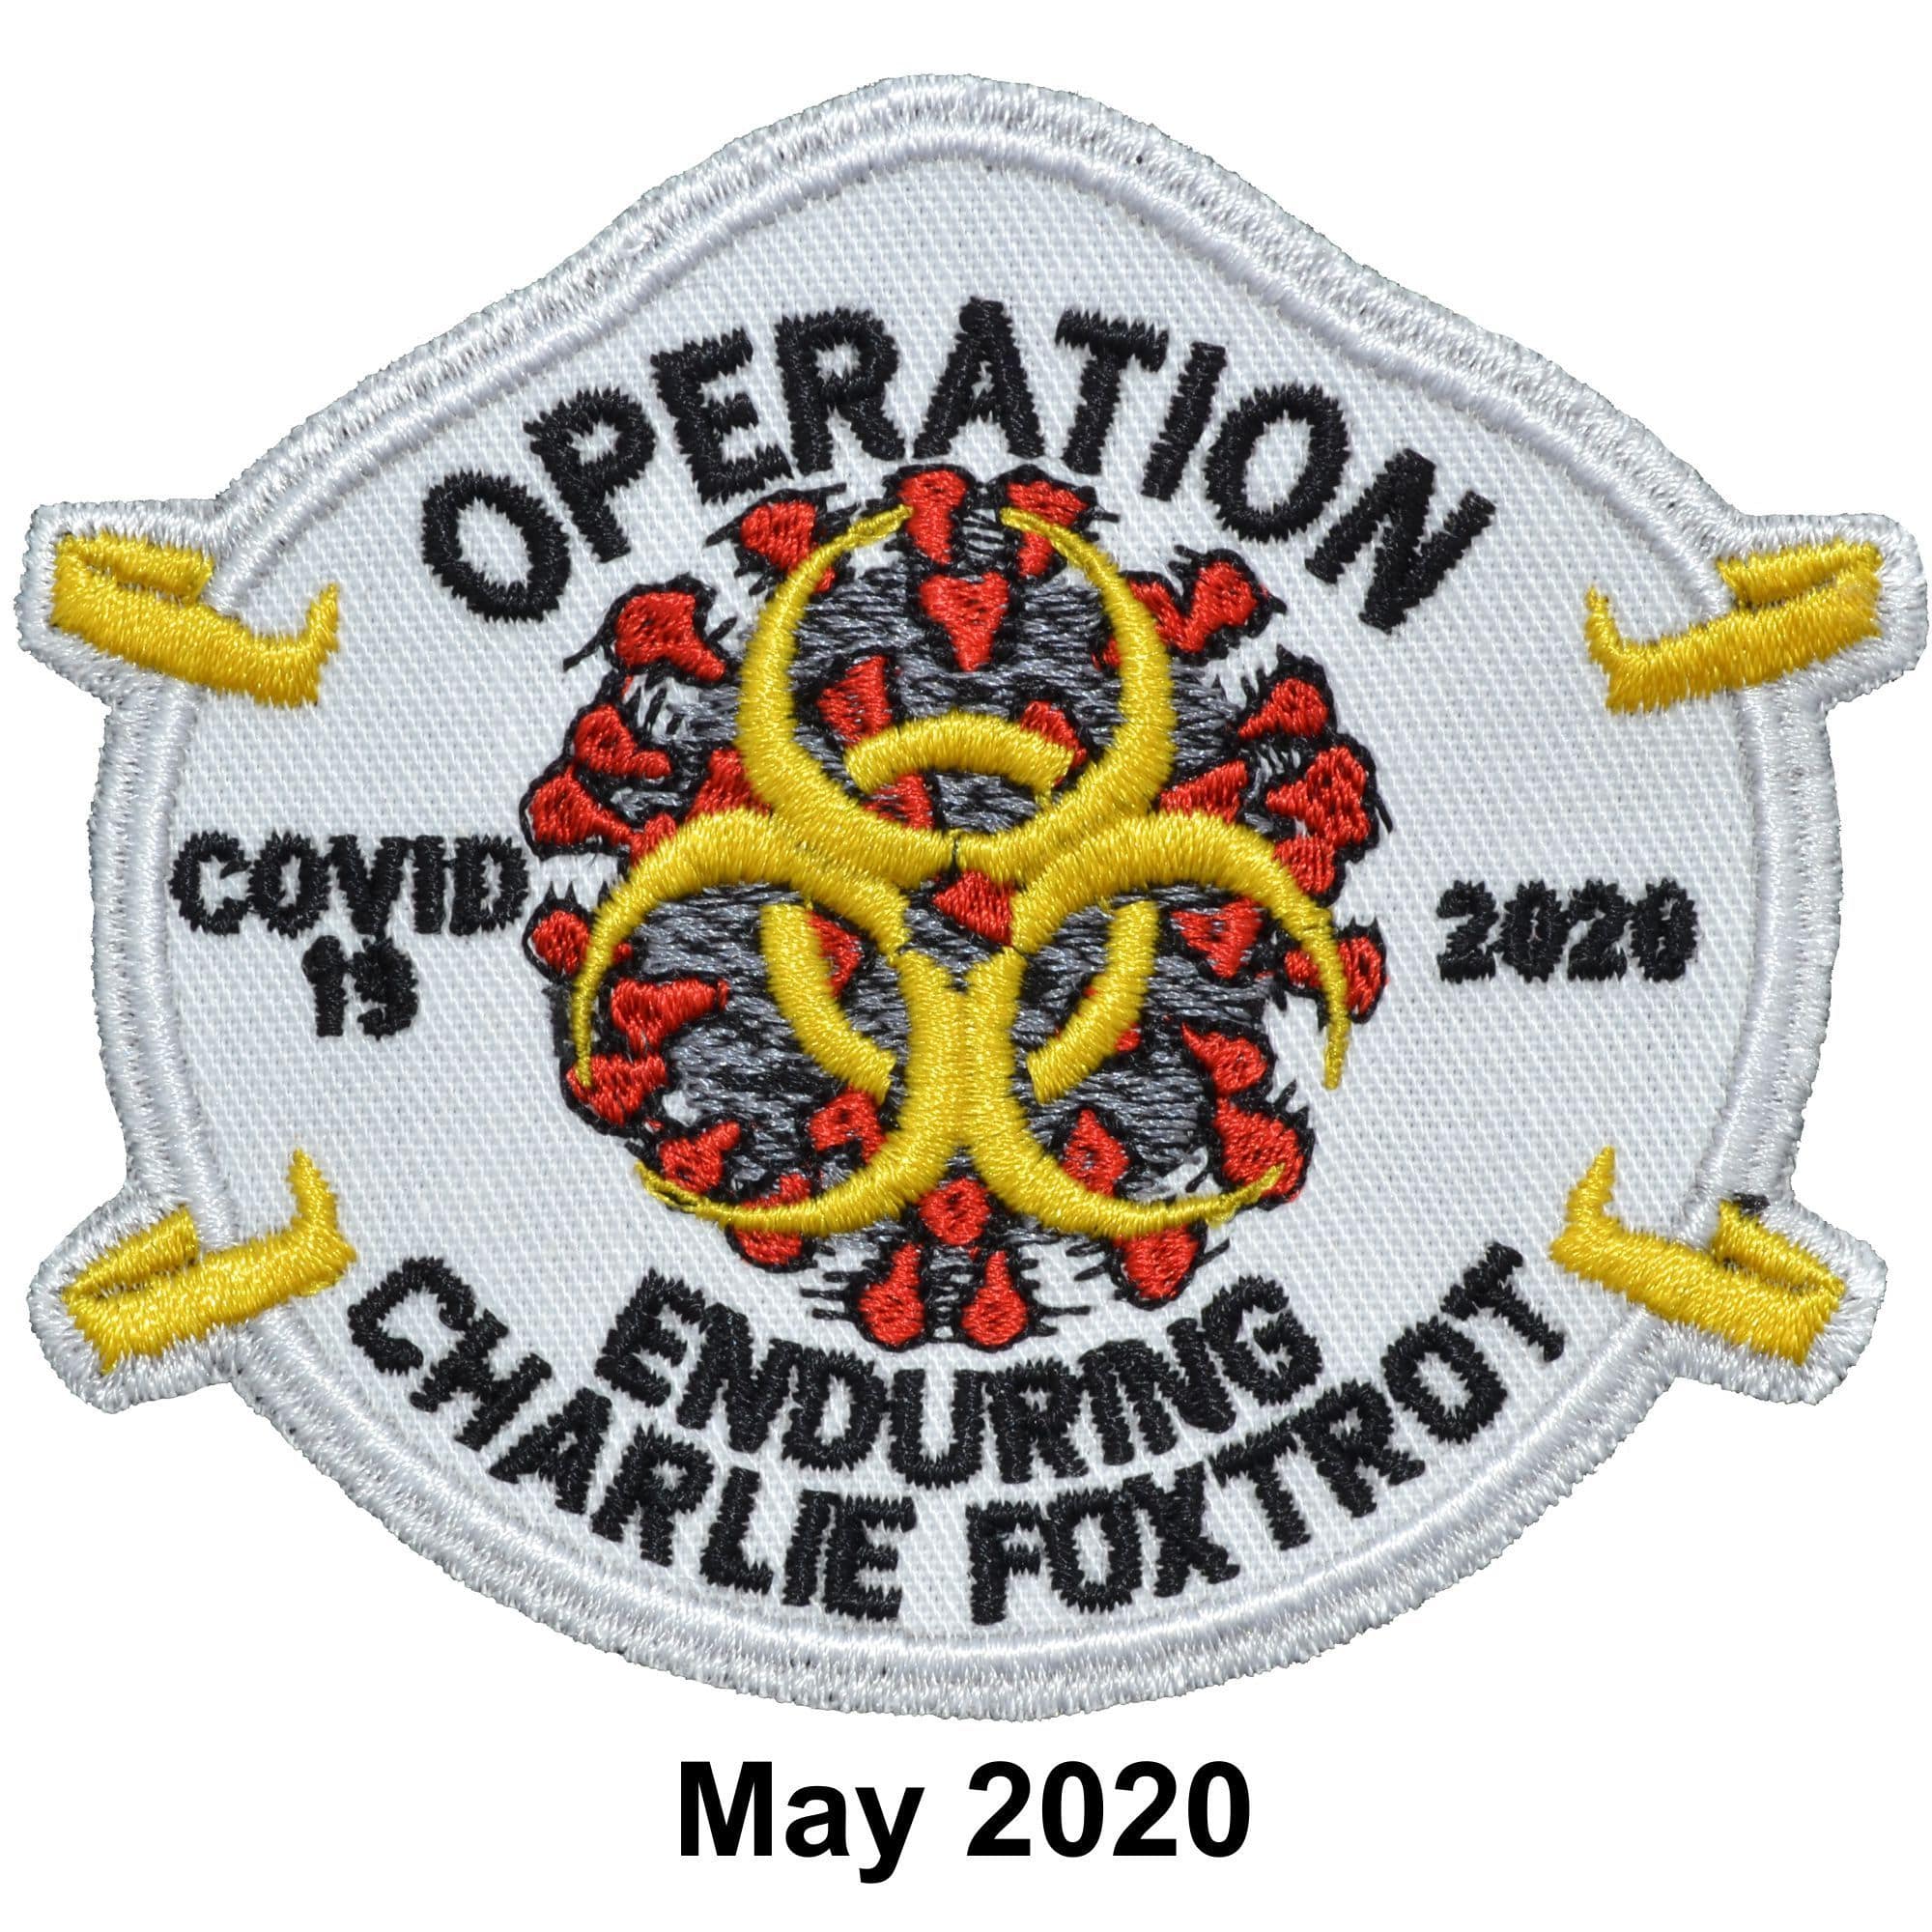 Tactical Gear Junkie Patches Full Color Operation Enduring Charlie Foxtrot - May 2020 POTM - LIMITED EXTENSION